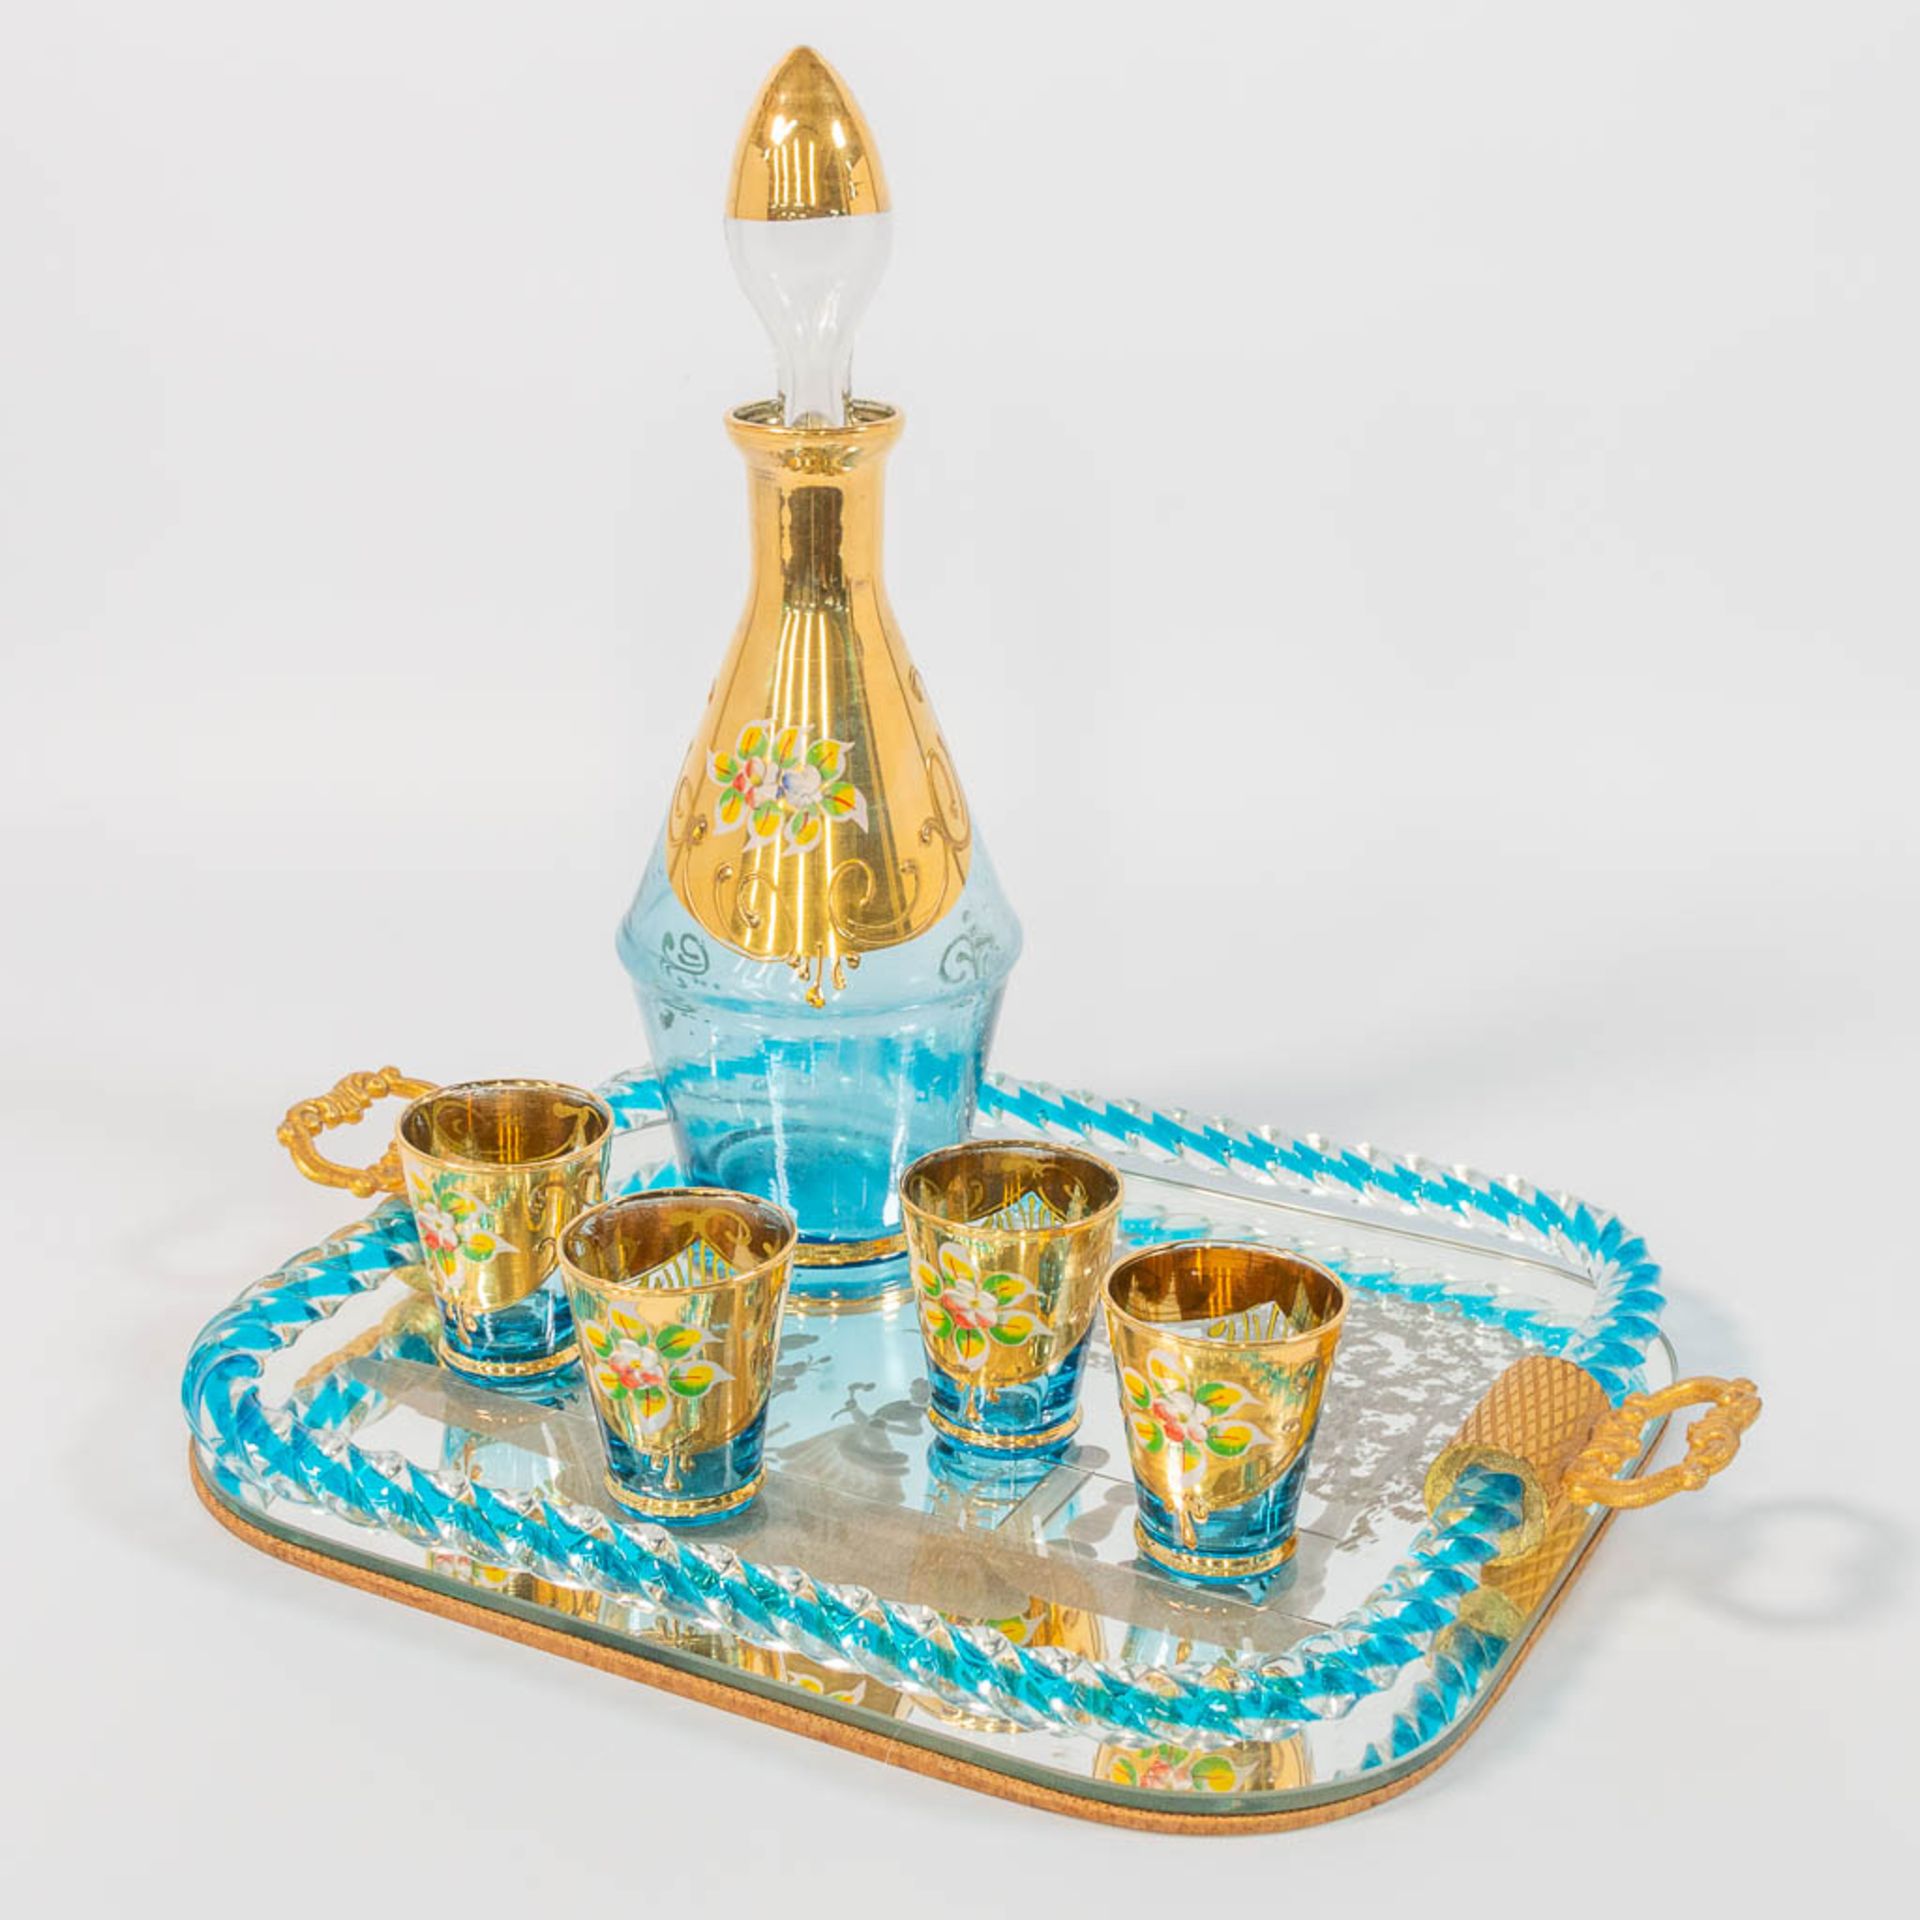 A decanter, glasses, and tray with gold painted flowers and etched decor. - Image 14 of 20